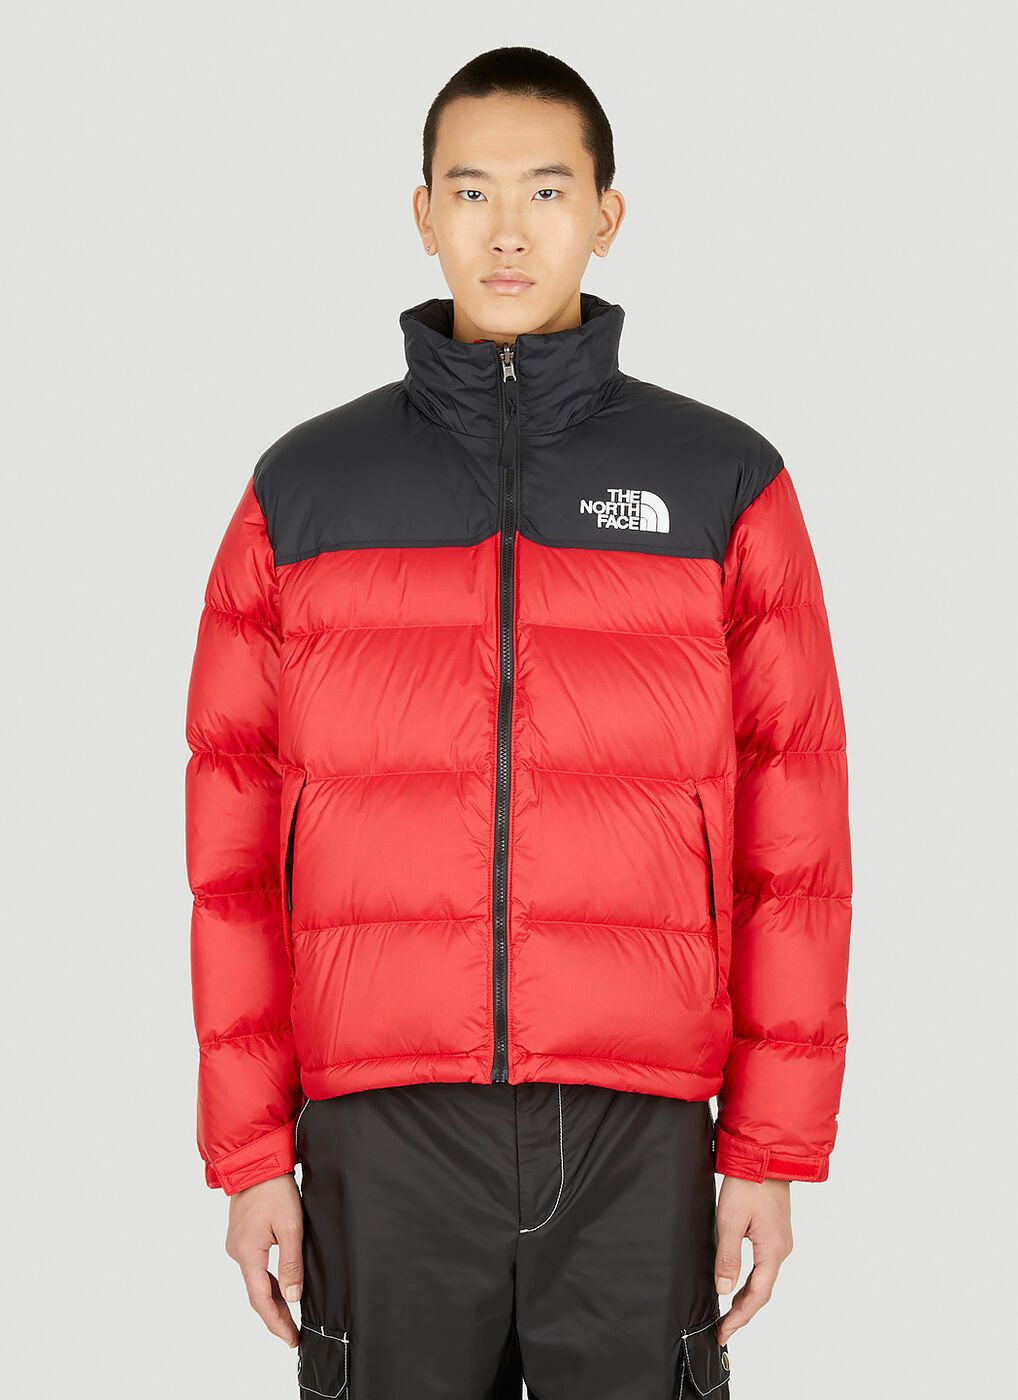 Expect upside down Contradiction 92 Retro Anniversary Nuptse Jacket in Red The North Face